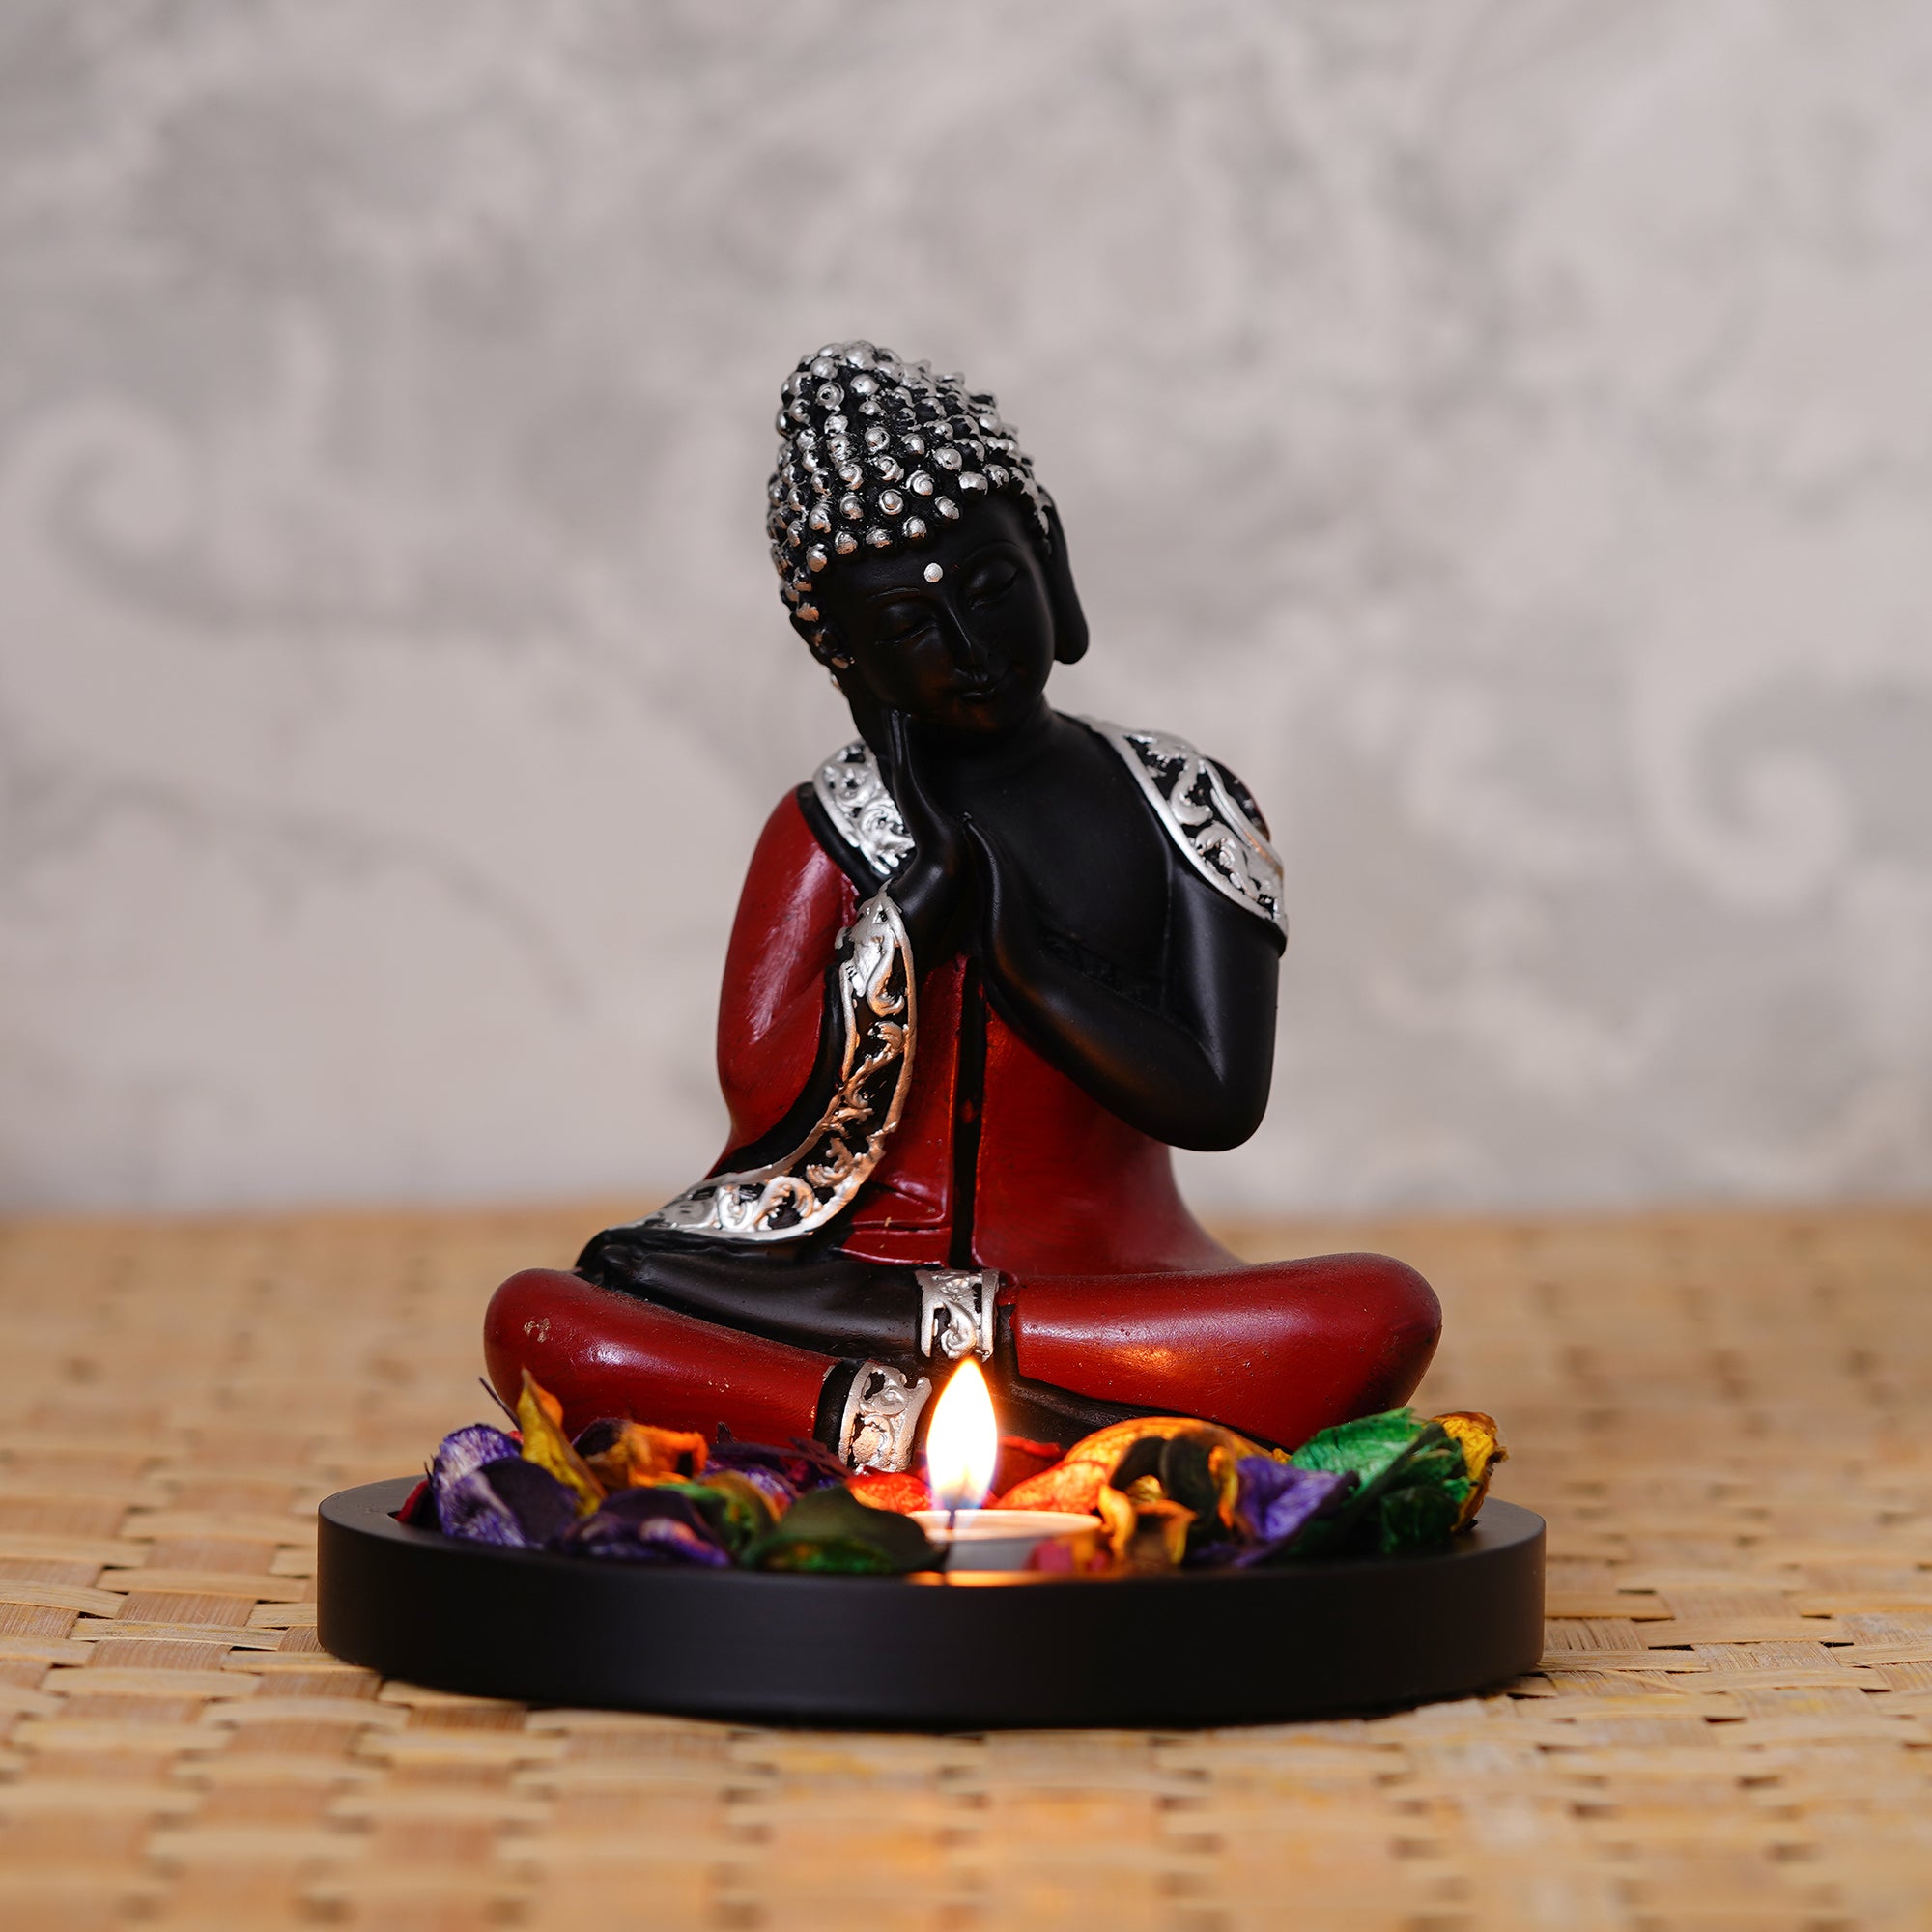 Polyresin Antique Finish Handcrafted Thinking Buddha Statue with Wooden Base, Fragranced Petals and Tealight (Red, Black and Silver)